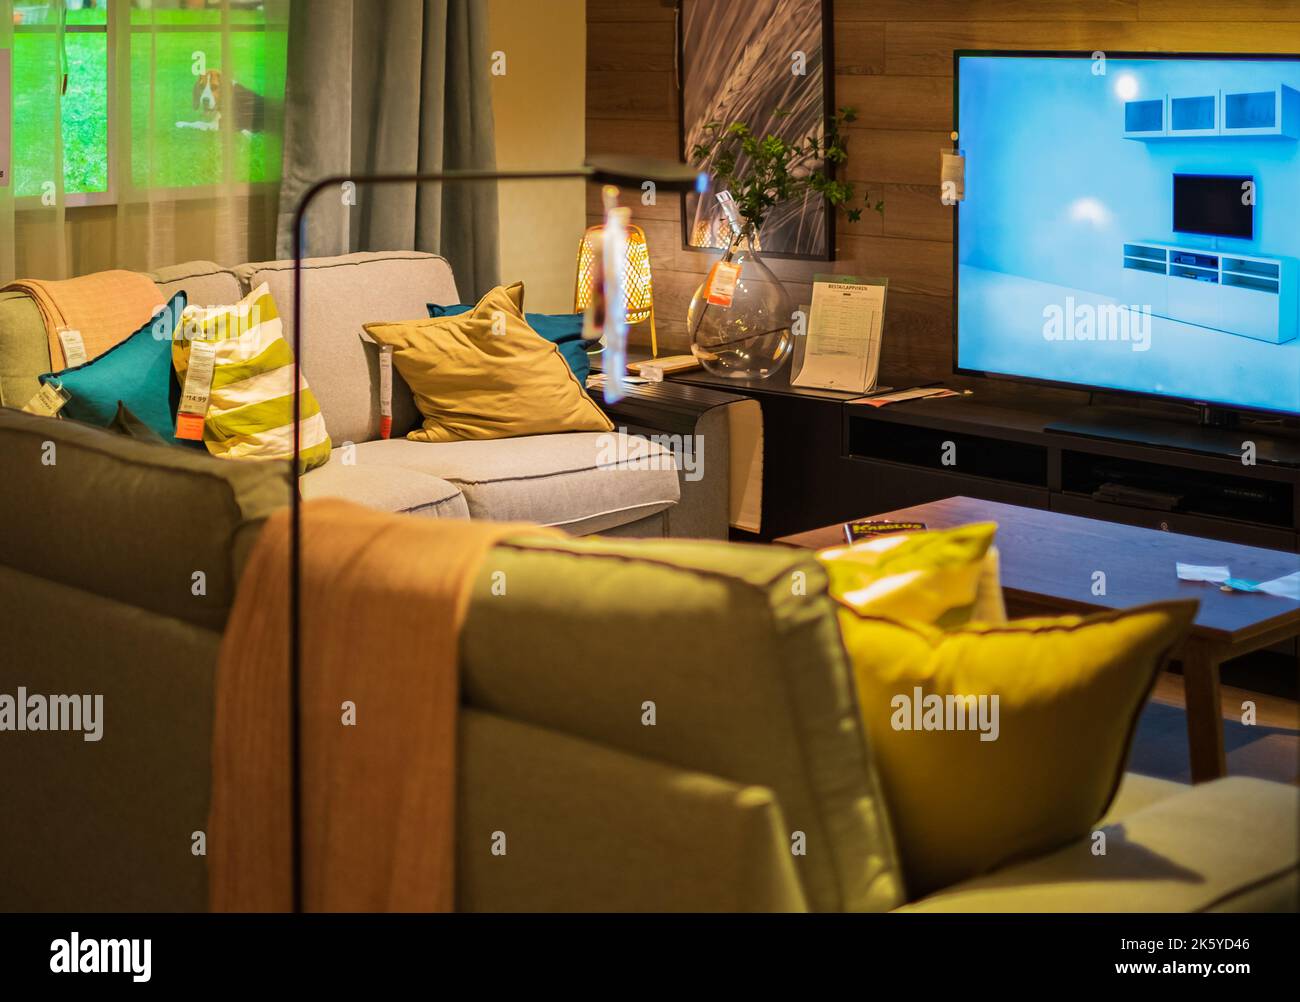 Interior view of living room inside IKEA store. IKEA is the world's largest furniture retailer. Ikea was founded in Sweden in 1943-September 29,2022-S Stock Photo